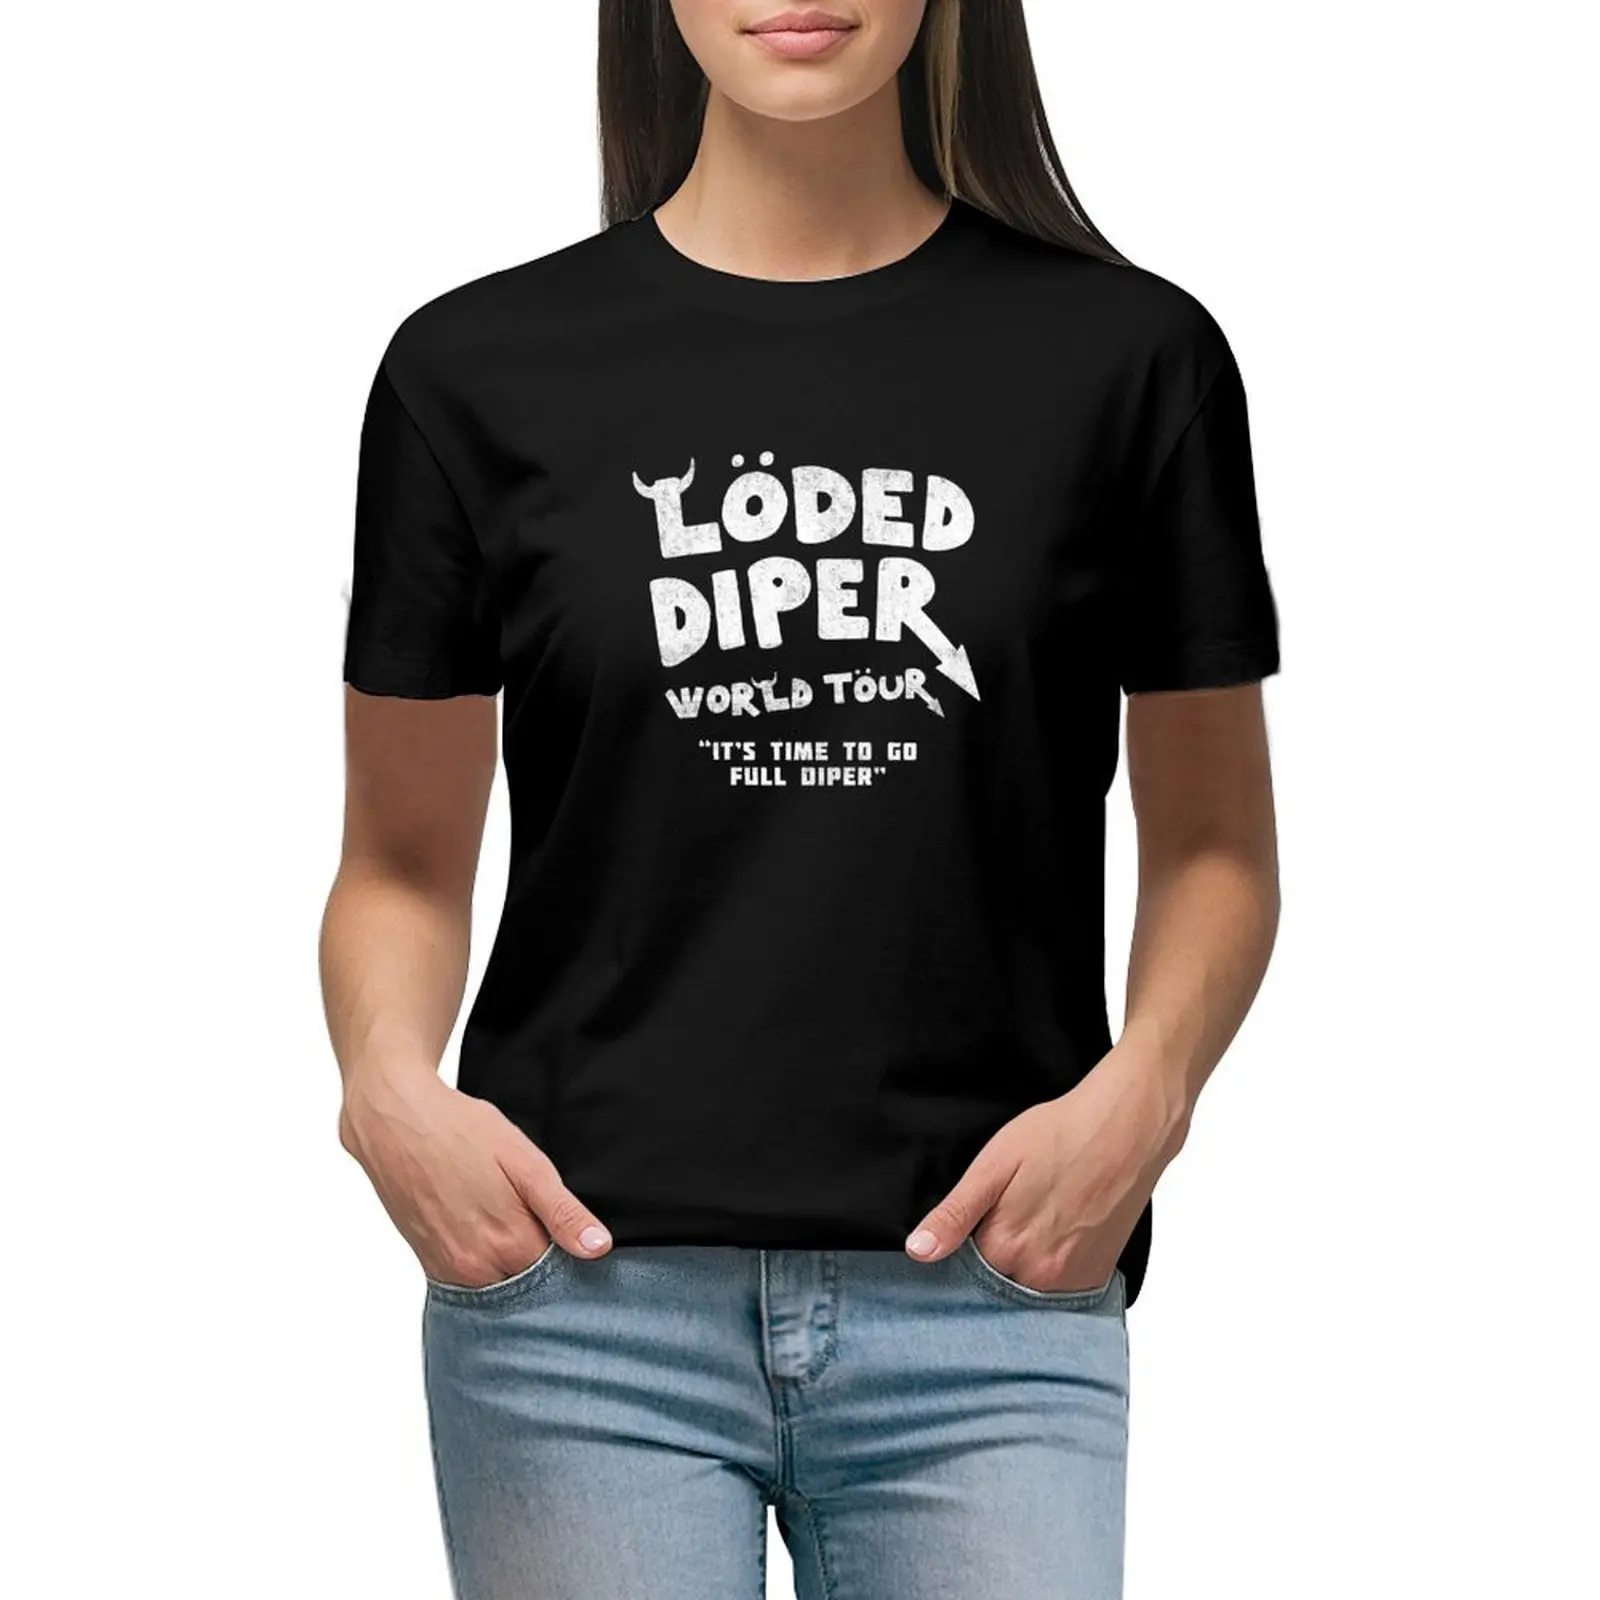 

Loded Diper World Tour - vintage T-shirt korean fashion graphics t shirts for Women loose fit